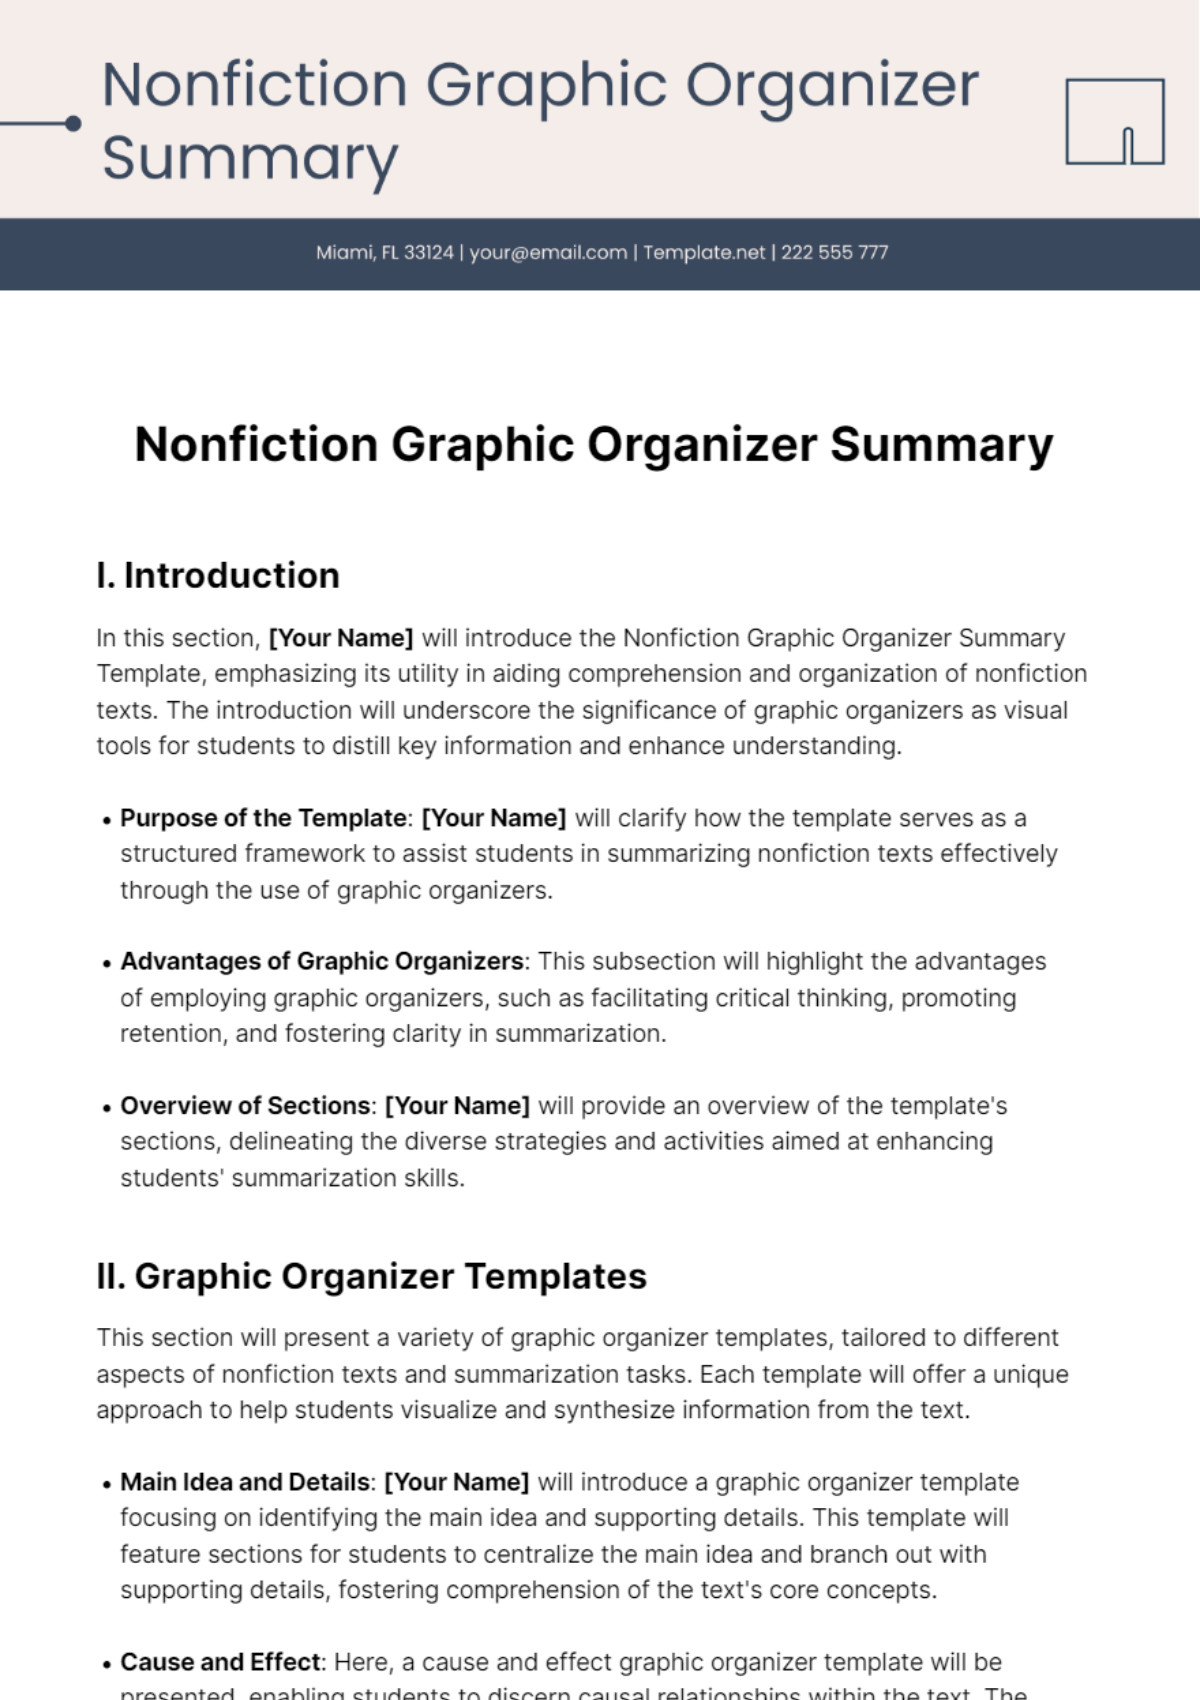 Free Nonfiction Graphic Organizer Summary Template